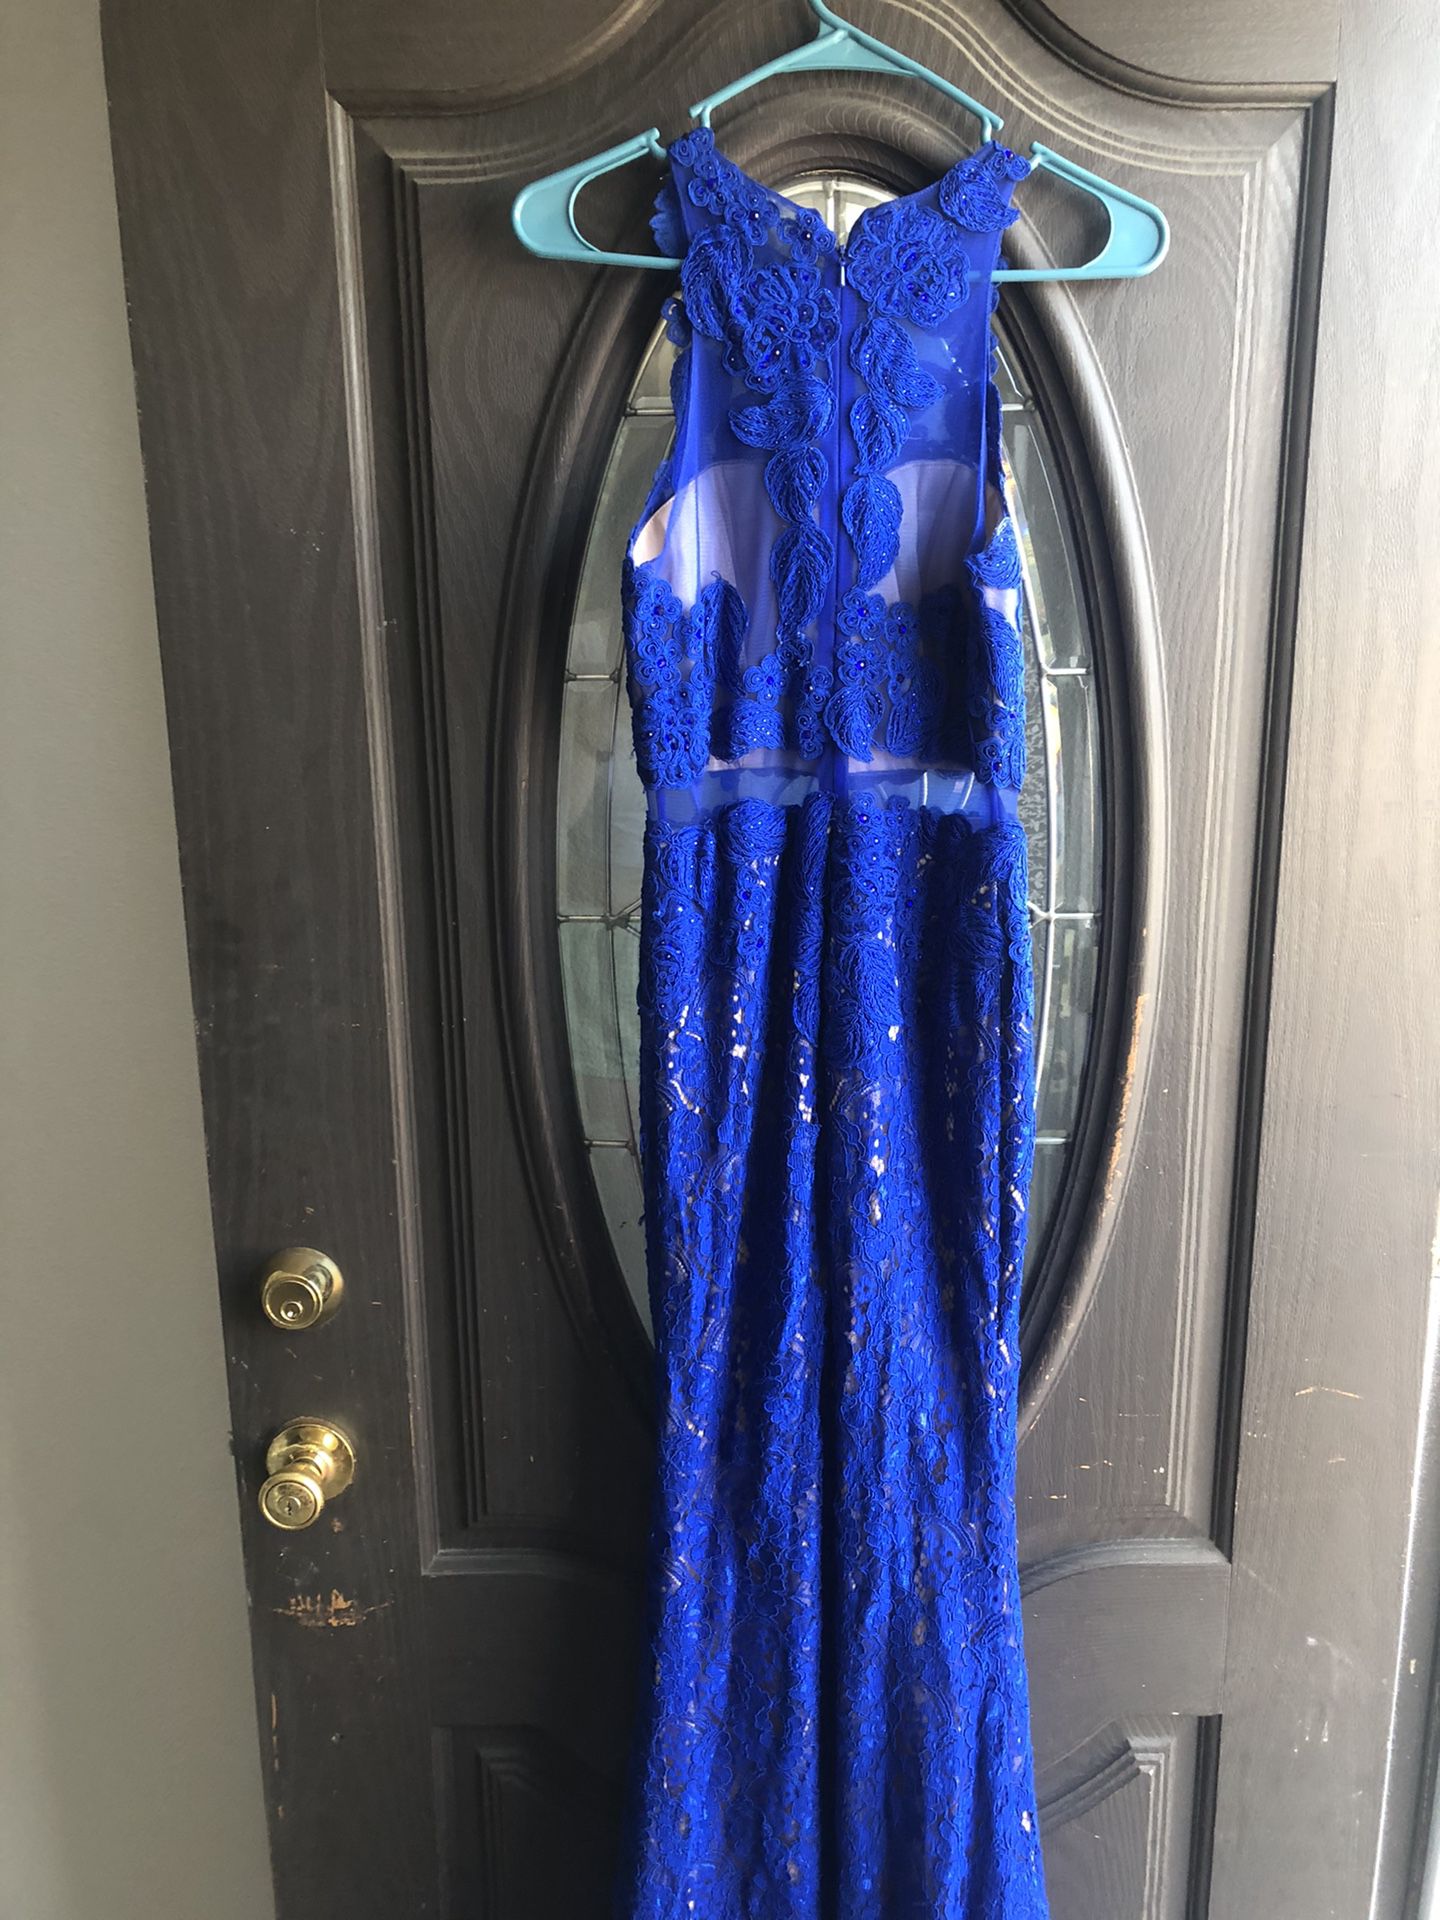 Blue long dress. For prom or wedding. Long dress size small-medium